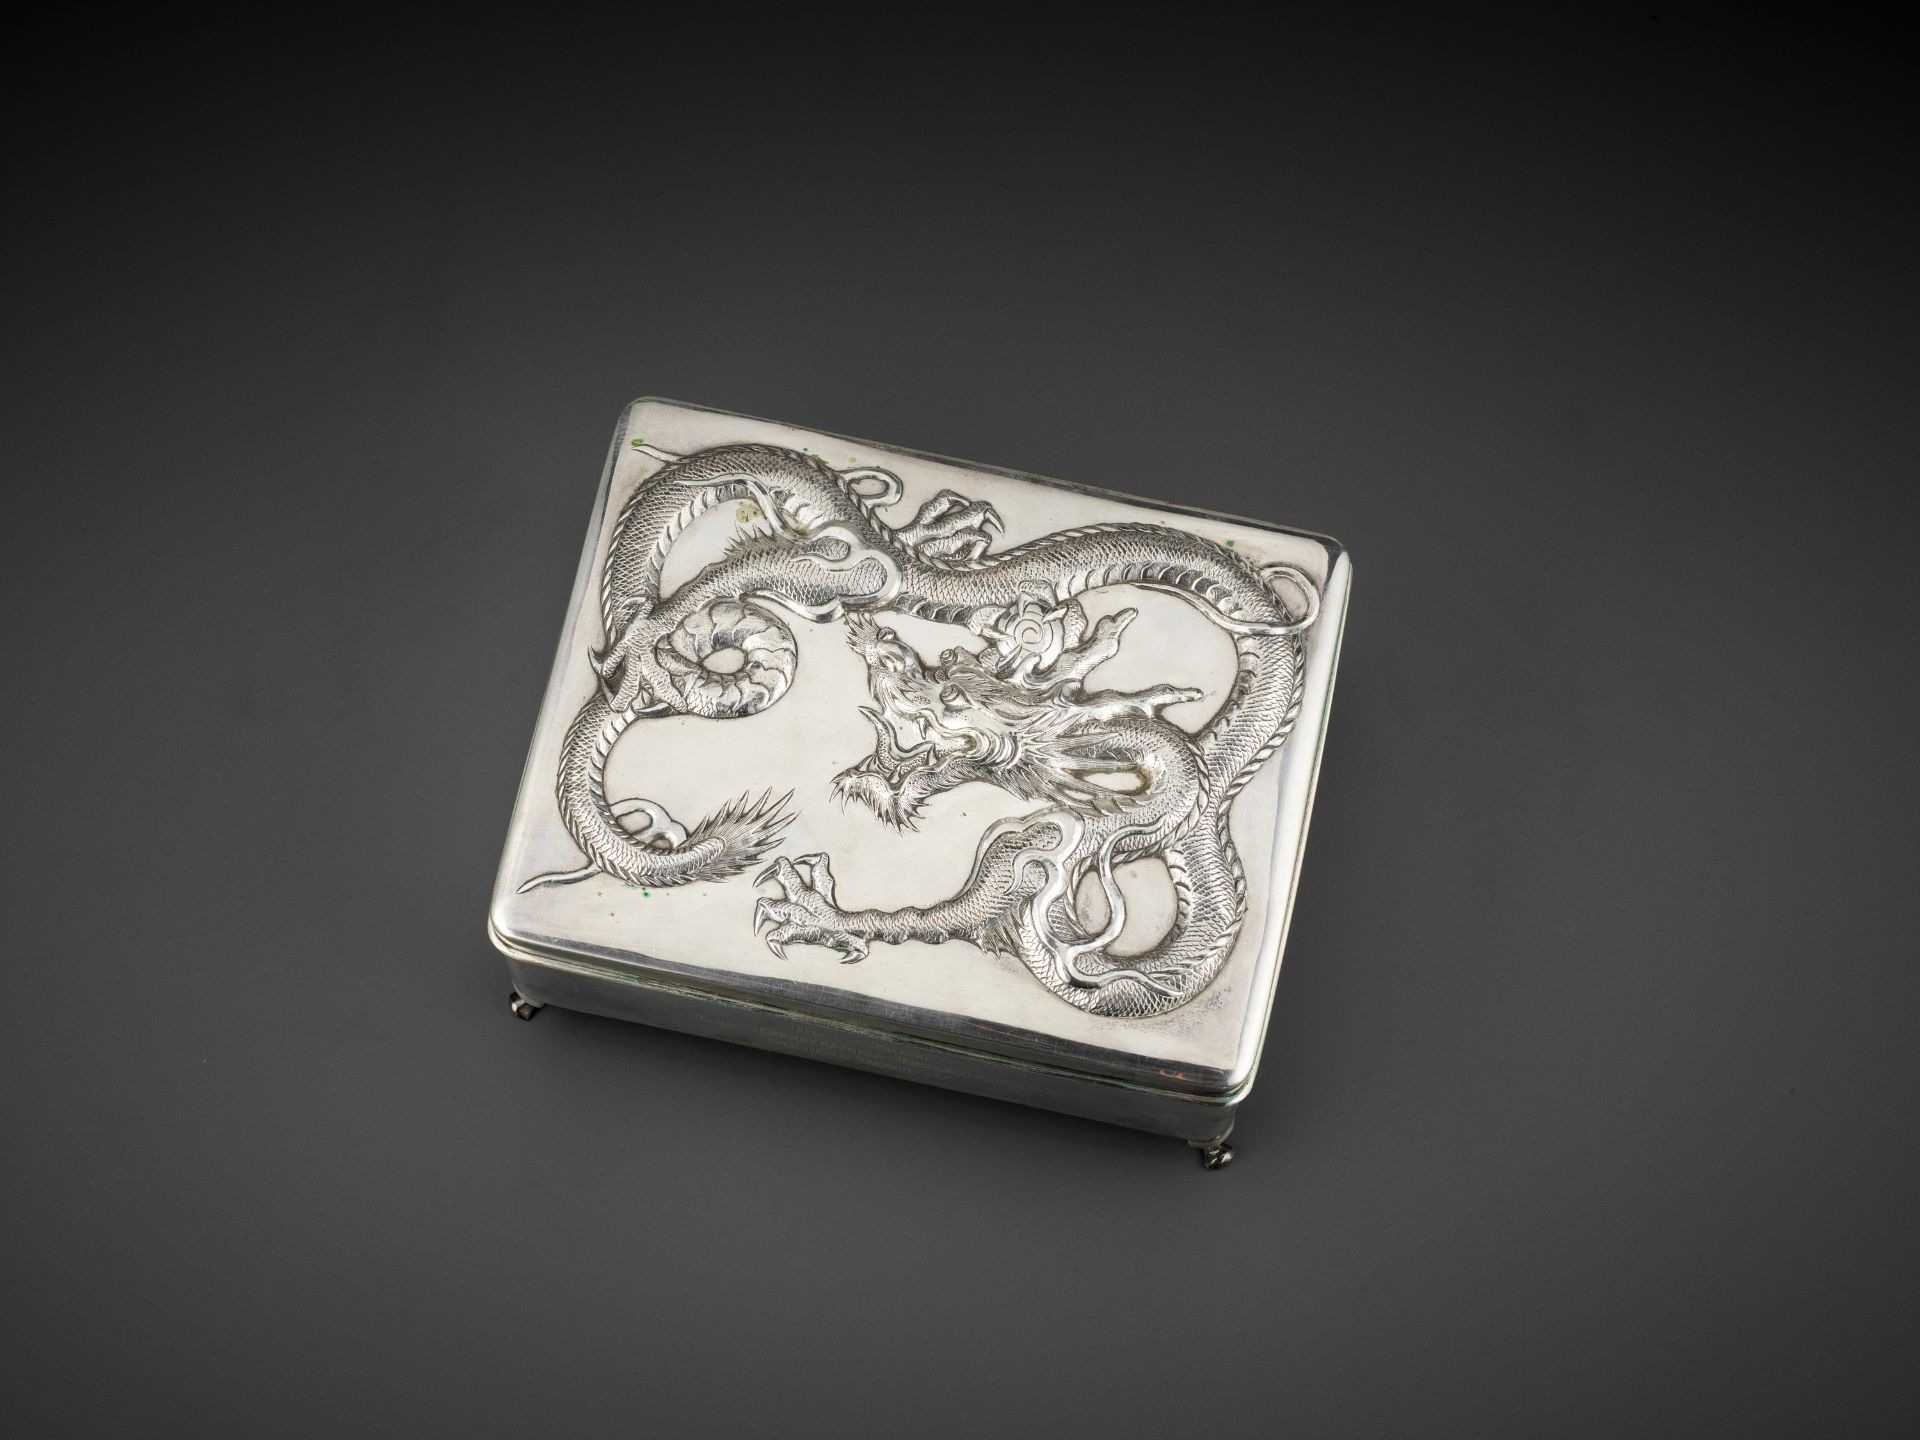 A SILVER REPOUSSE 'DRAGON' BOX AND COVER, WANG HING, LATE QING TO REPUBLIC